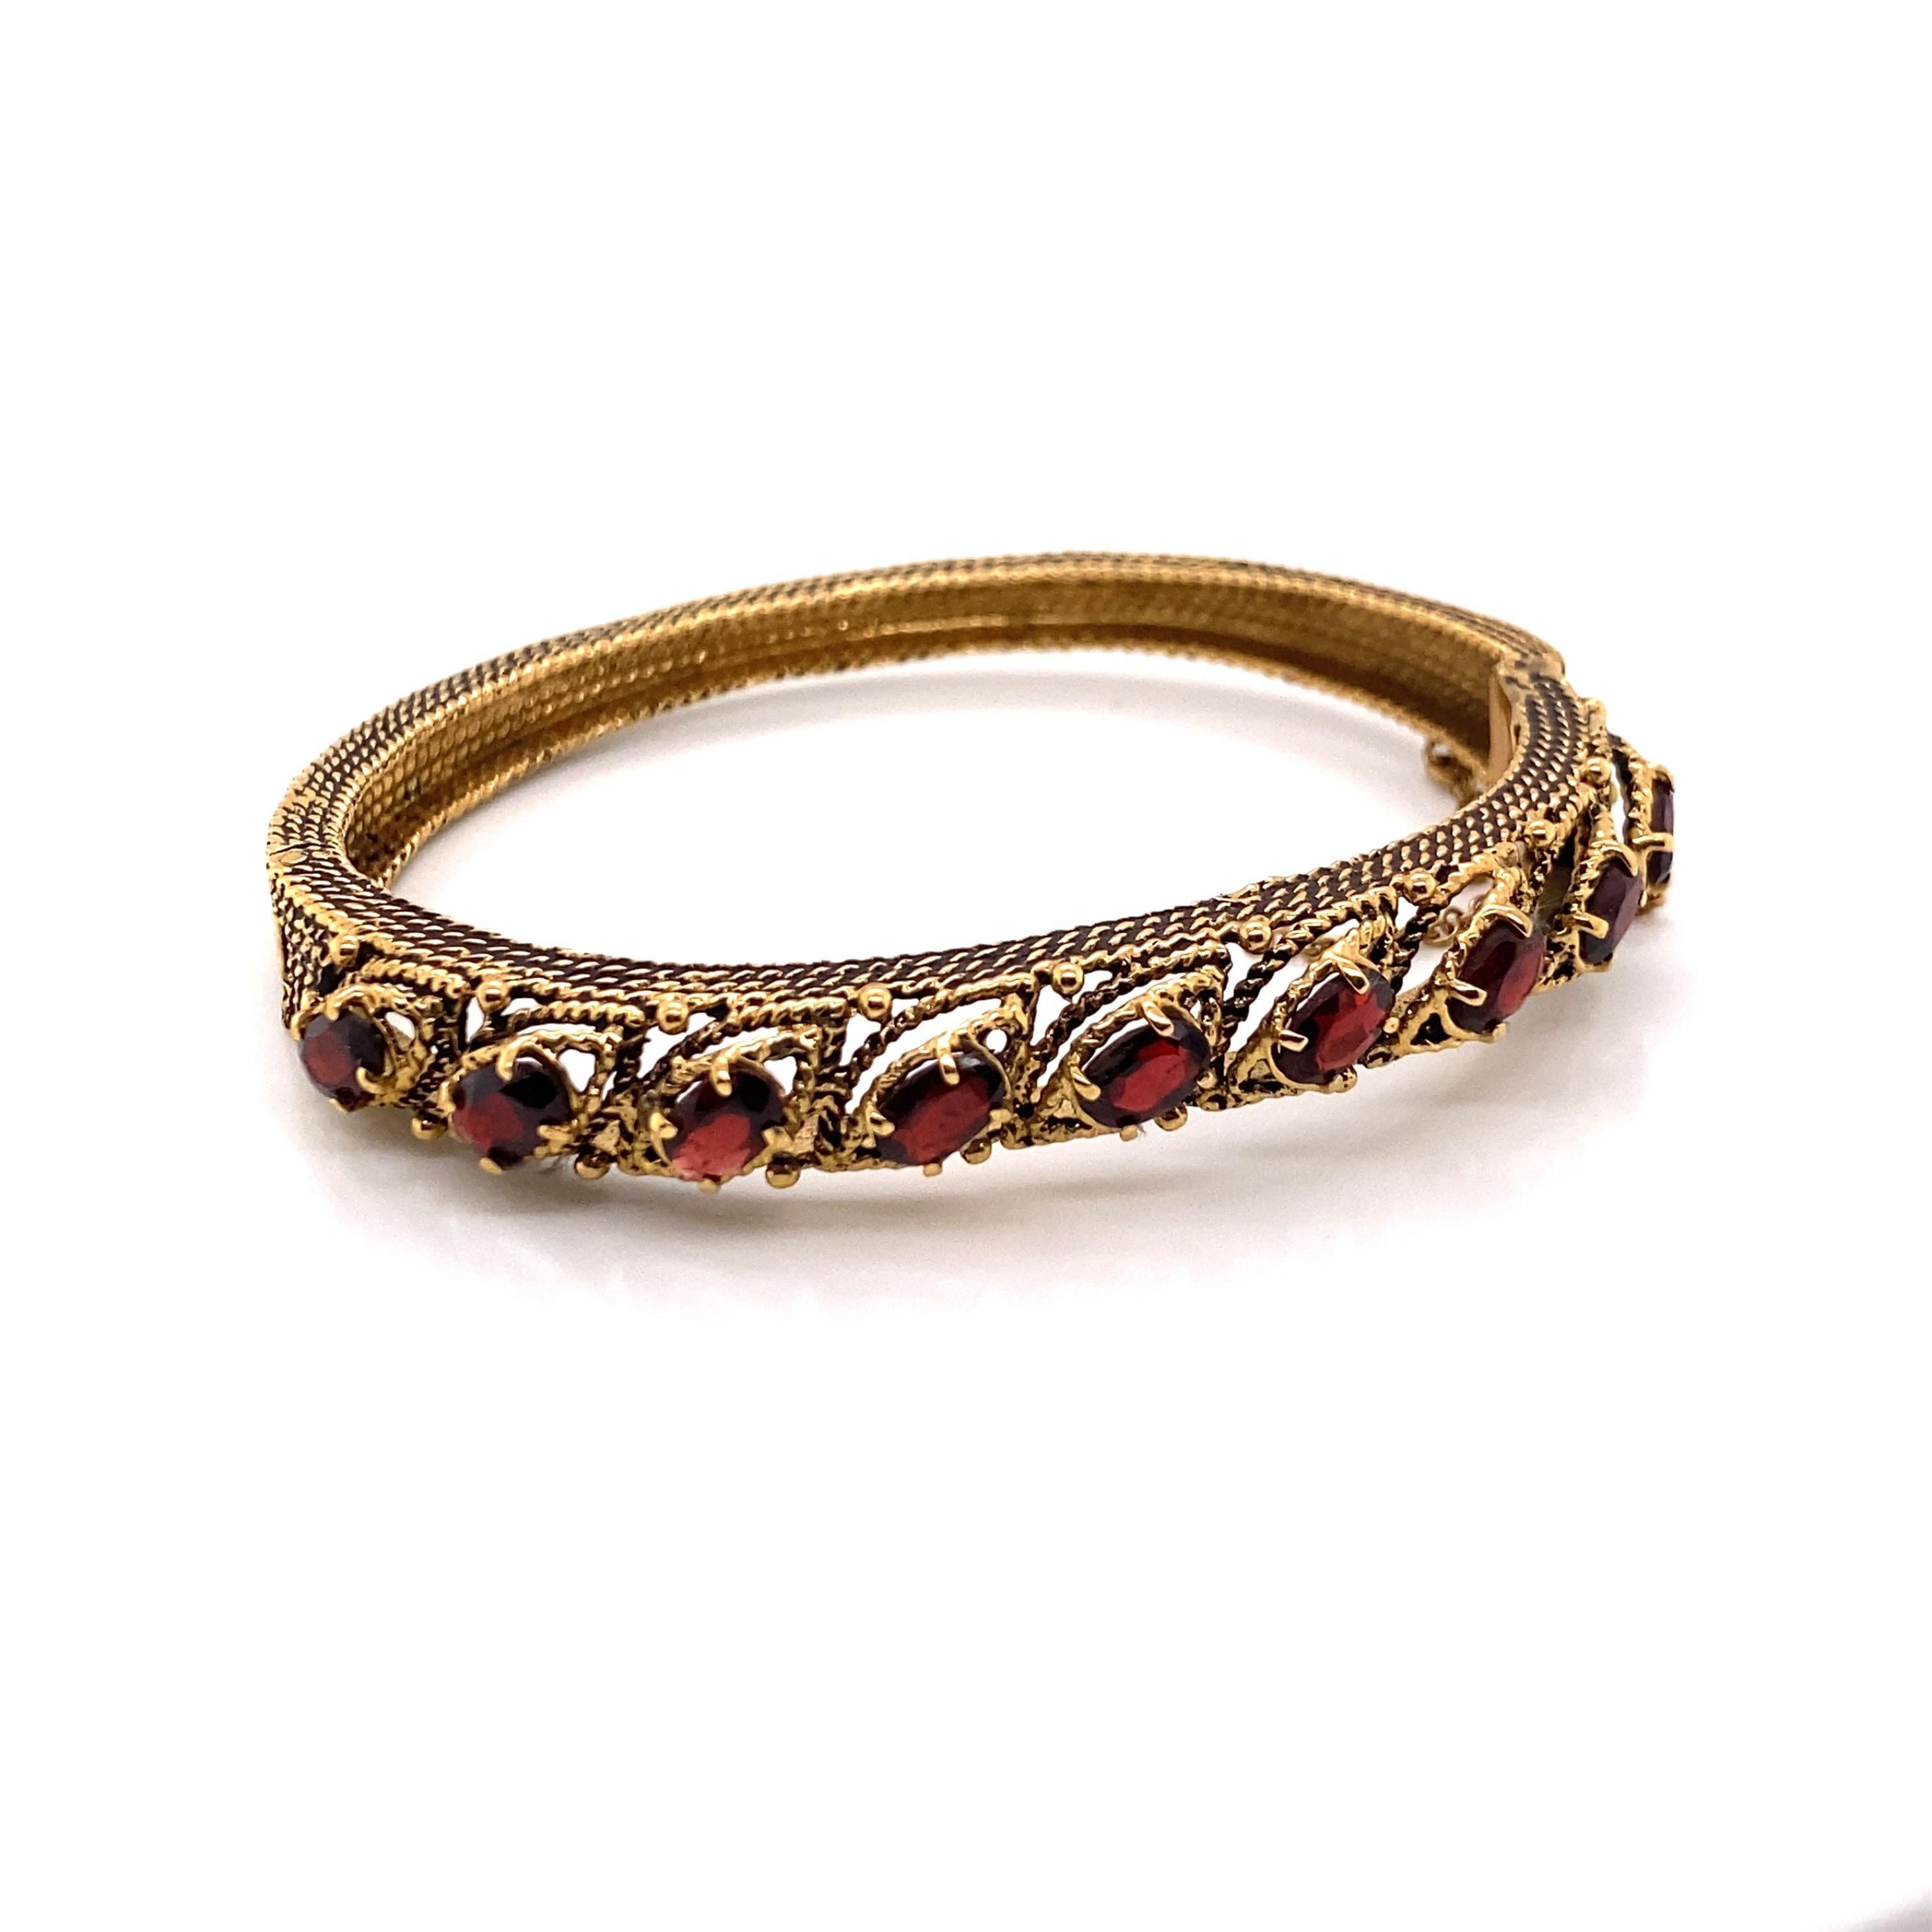 Vintage 14K Yellow Gold Garnet Bangle Bracelet - The bracelet contains 9 oval garnets that measure 6 x 4mm. The width of the bangle is 8.5mm and tapers down to 5mm and has oxidation on the side. The bracelet weighs 23.44 grams.